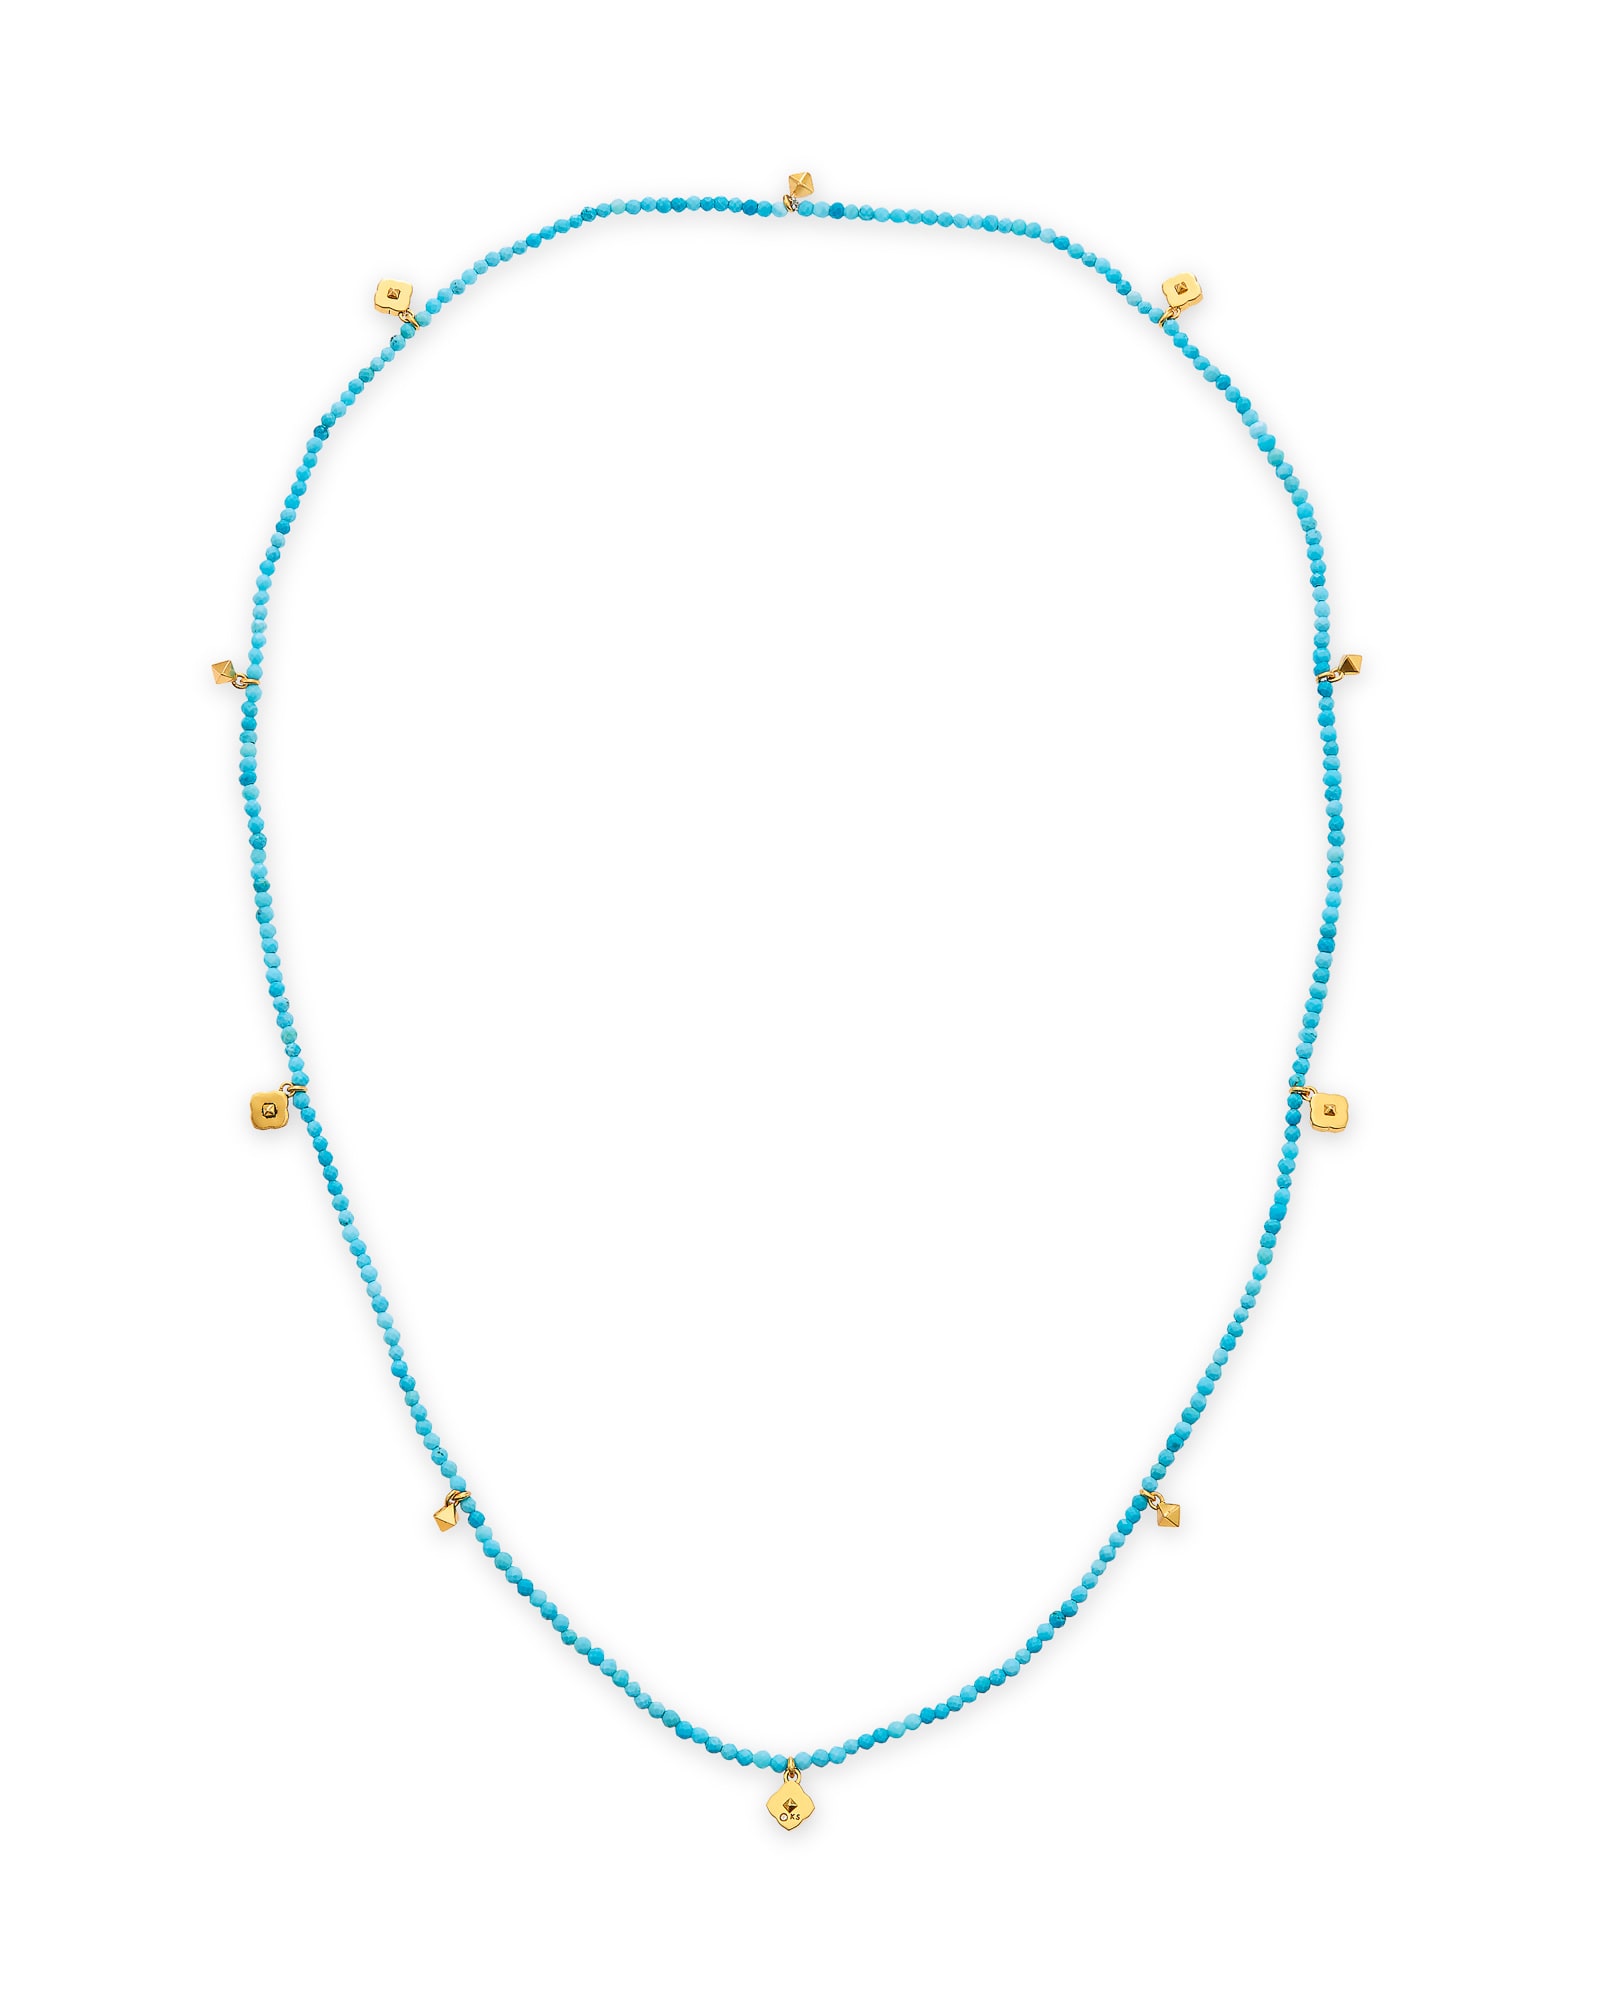 Kendra Scott Britt Vintage Gold Convertible Stretch Necklace in Variegated Turquoise | Magnesite